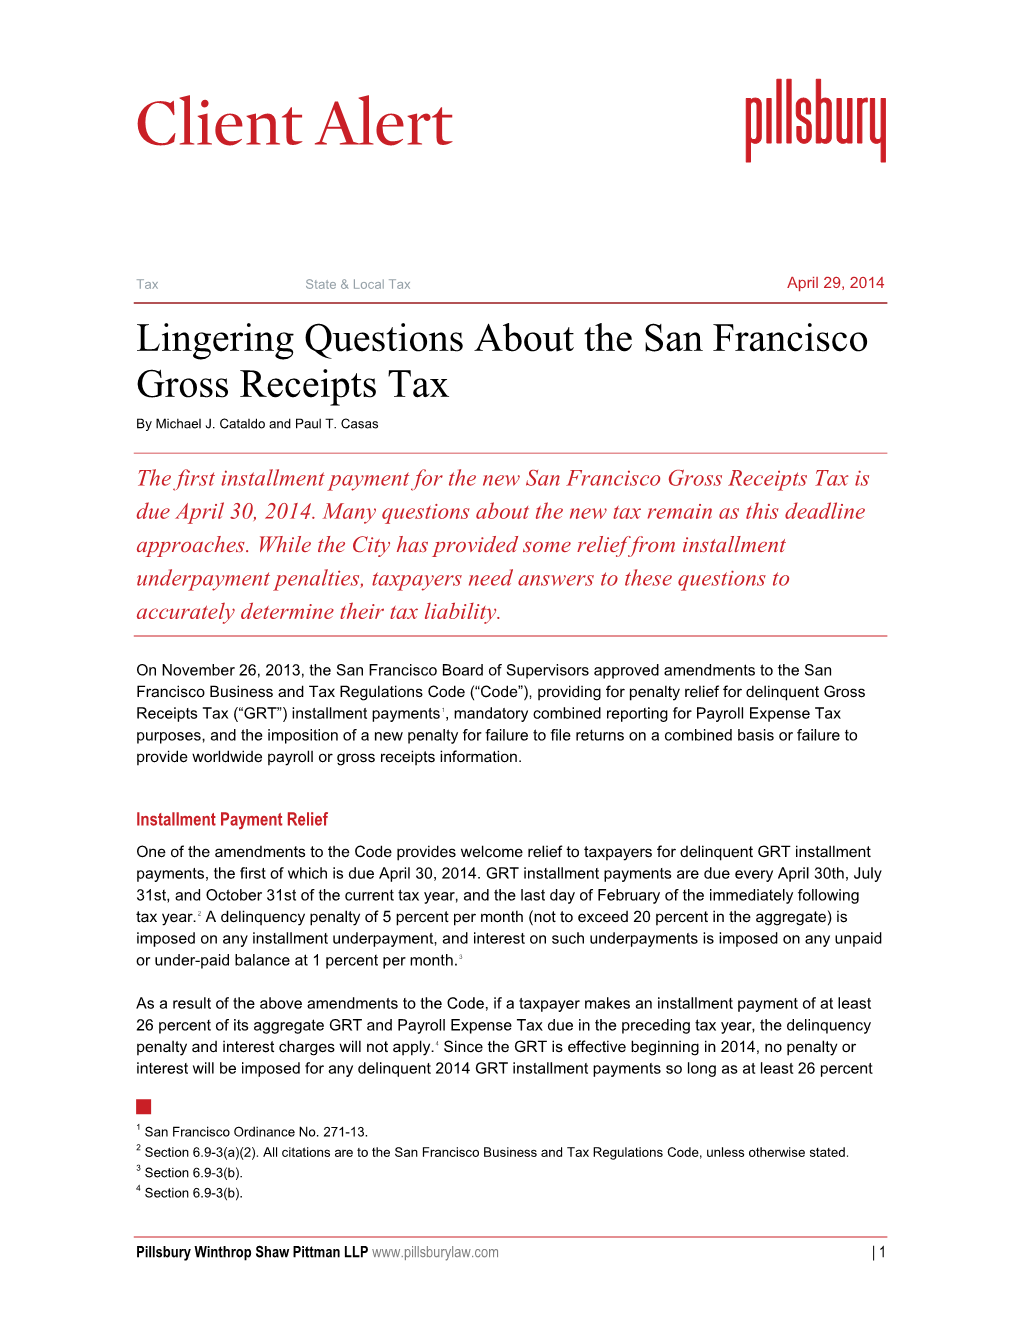 Lingering Questions About the San Francisco Gross Receipts